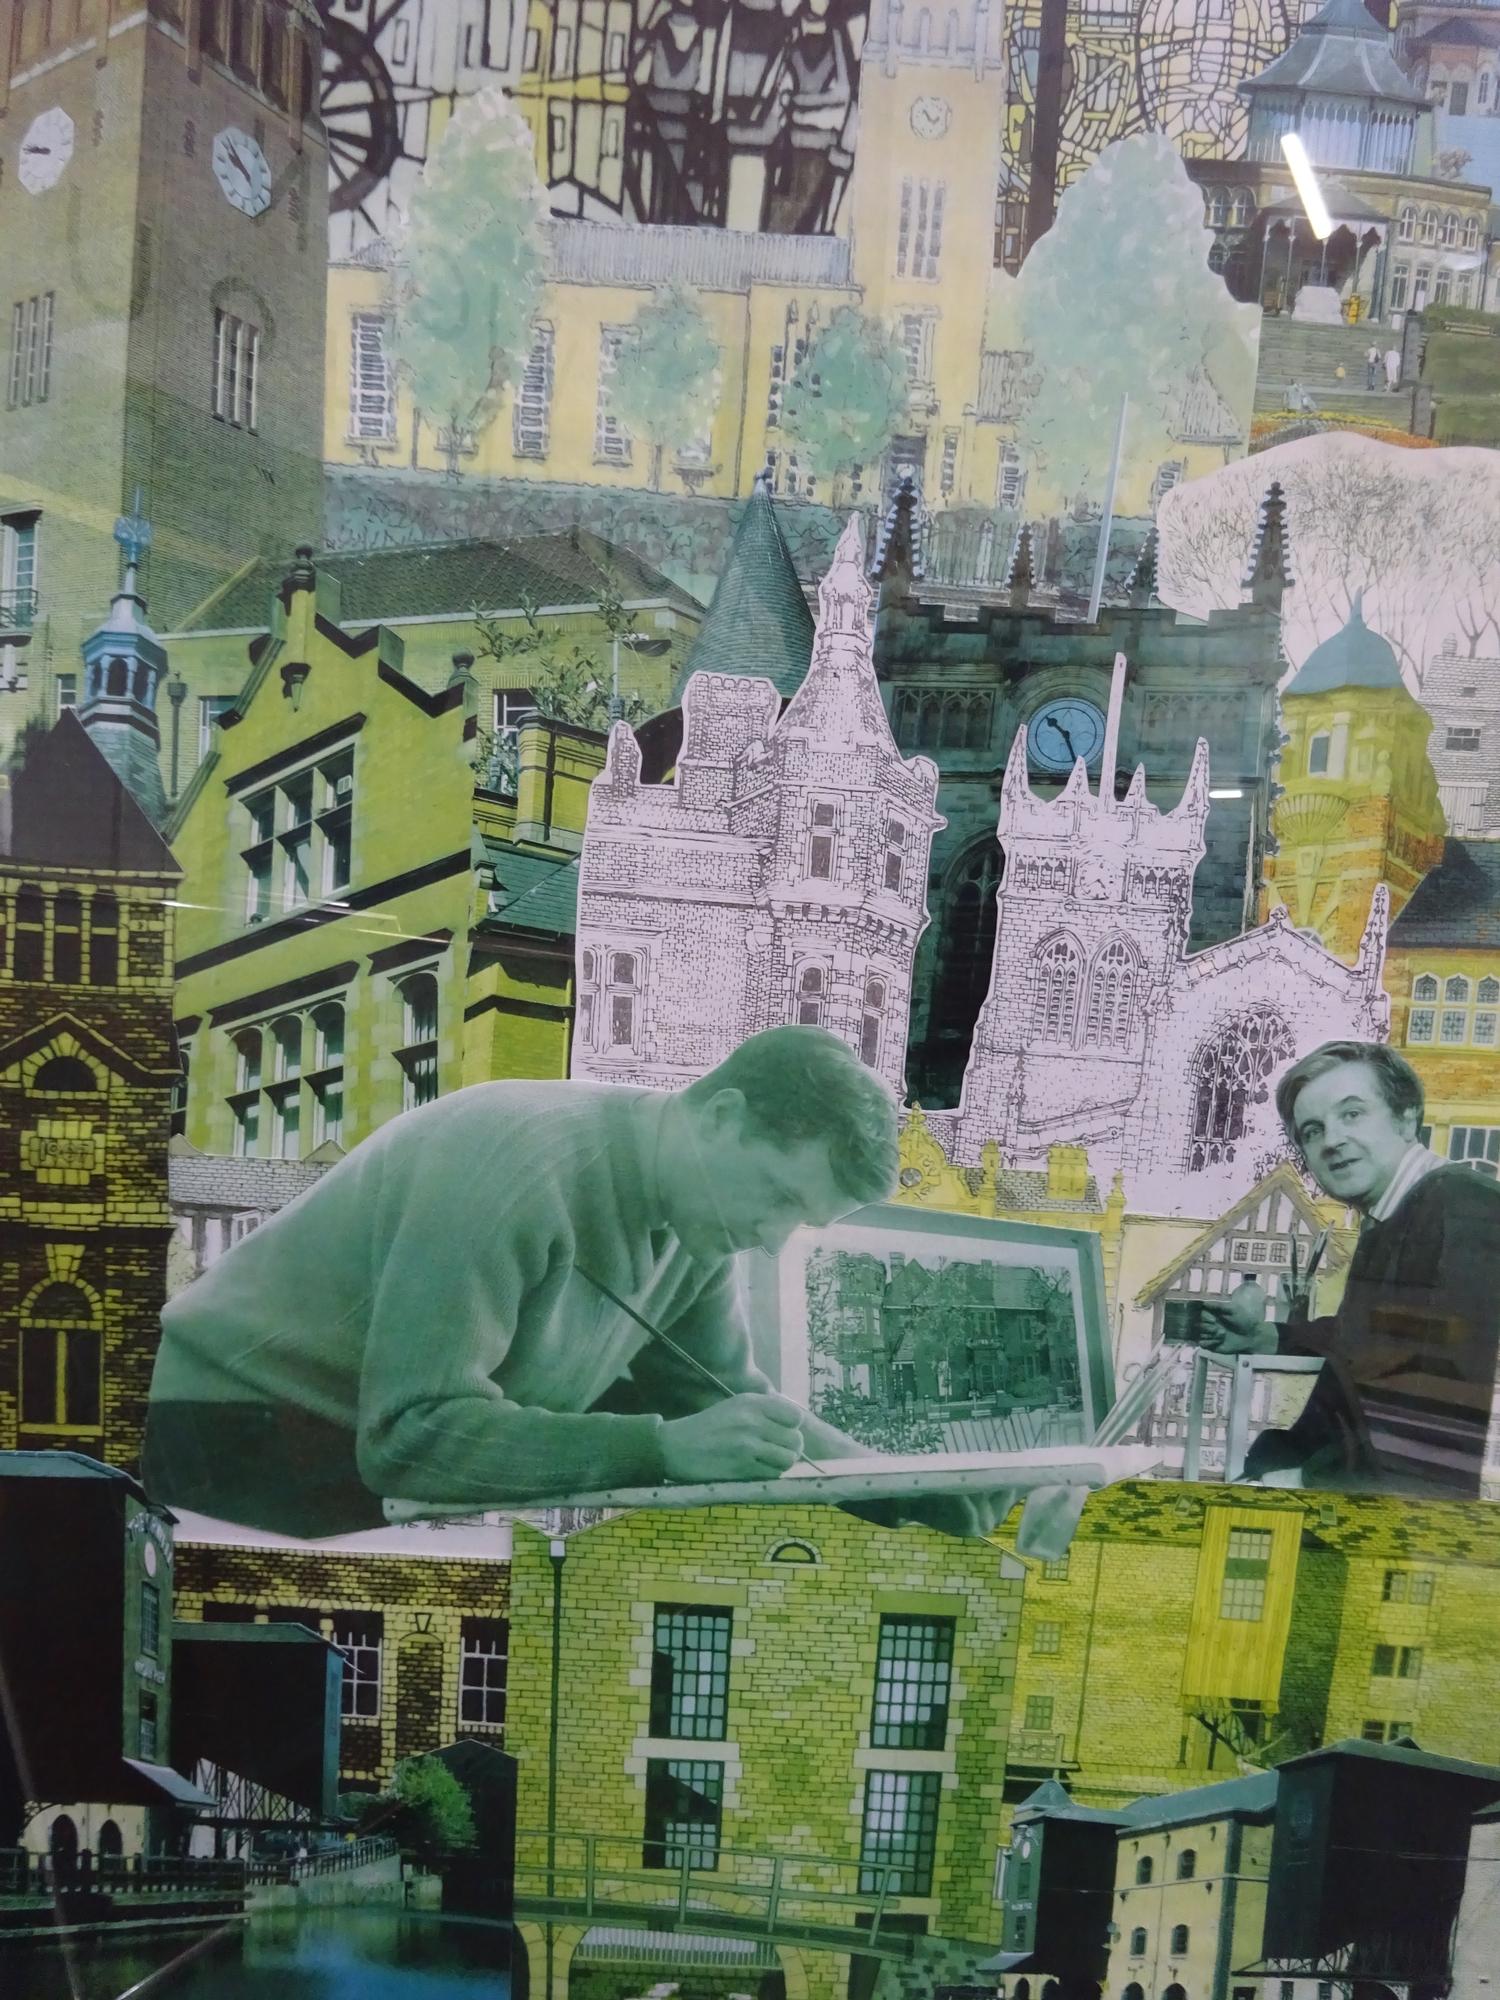 Collage of Gerald Rickards work, created by staff at the Drumcroon gallery in Wigan. - Image 2 of 5